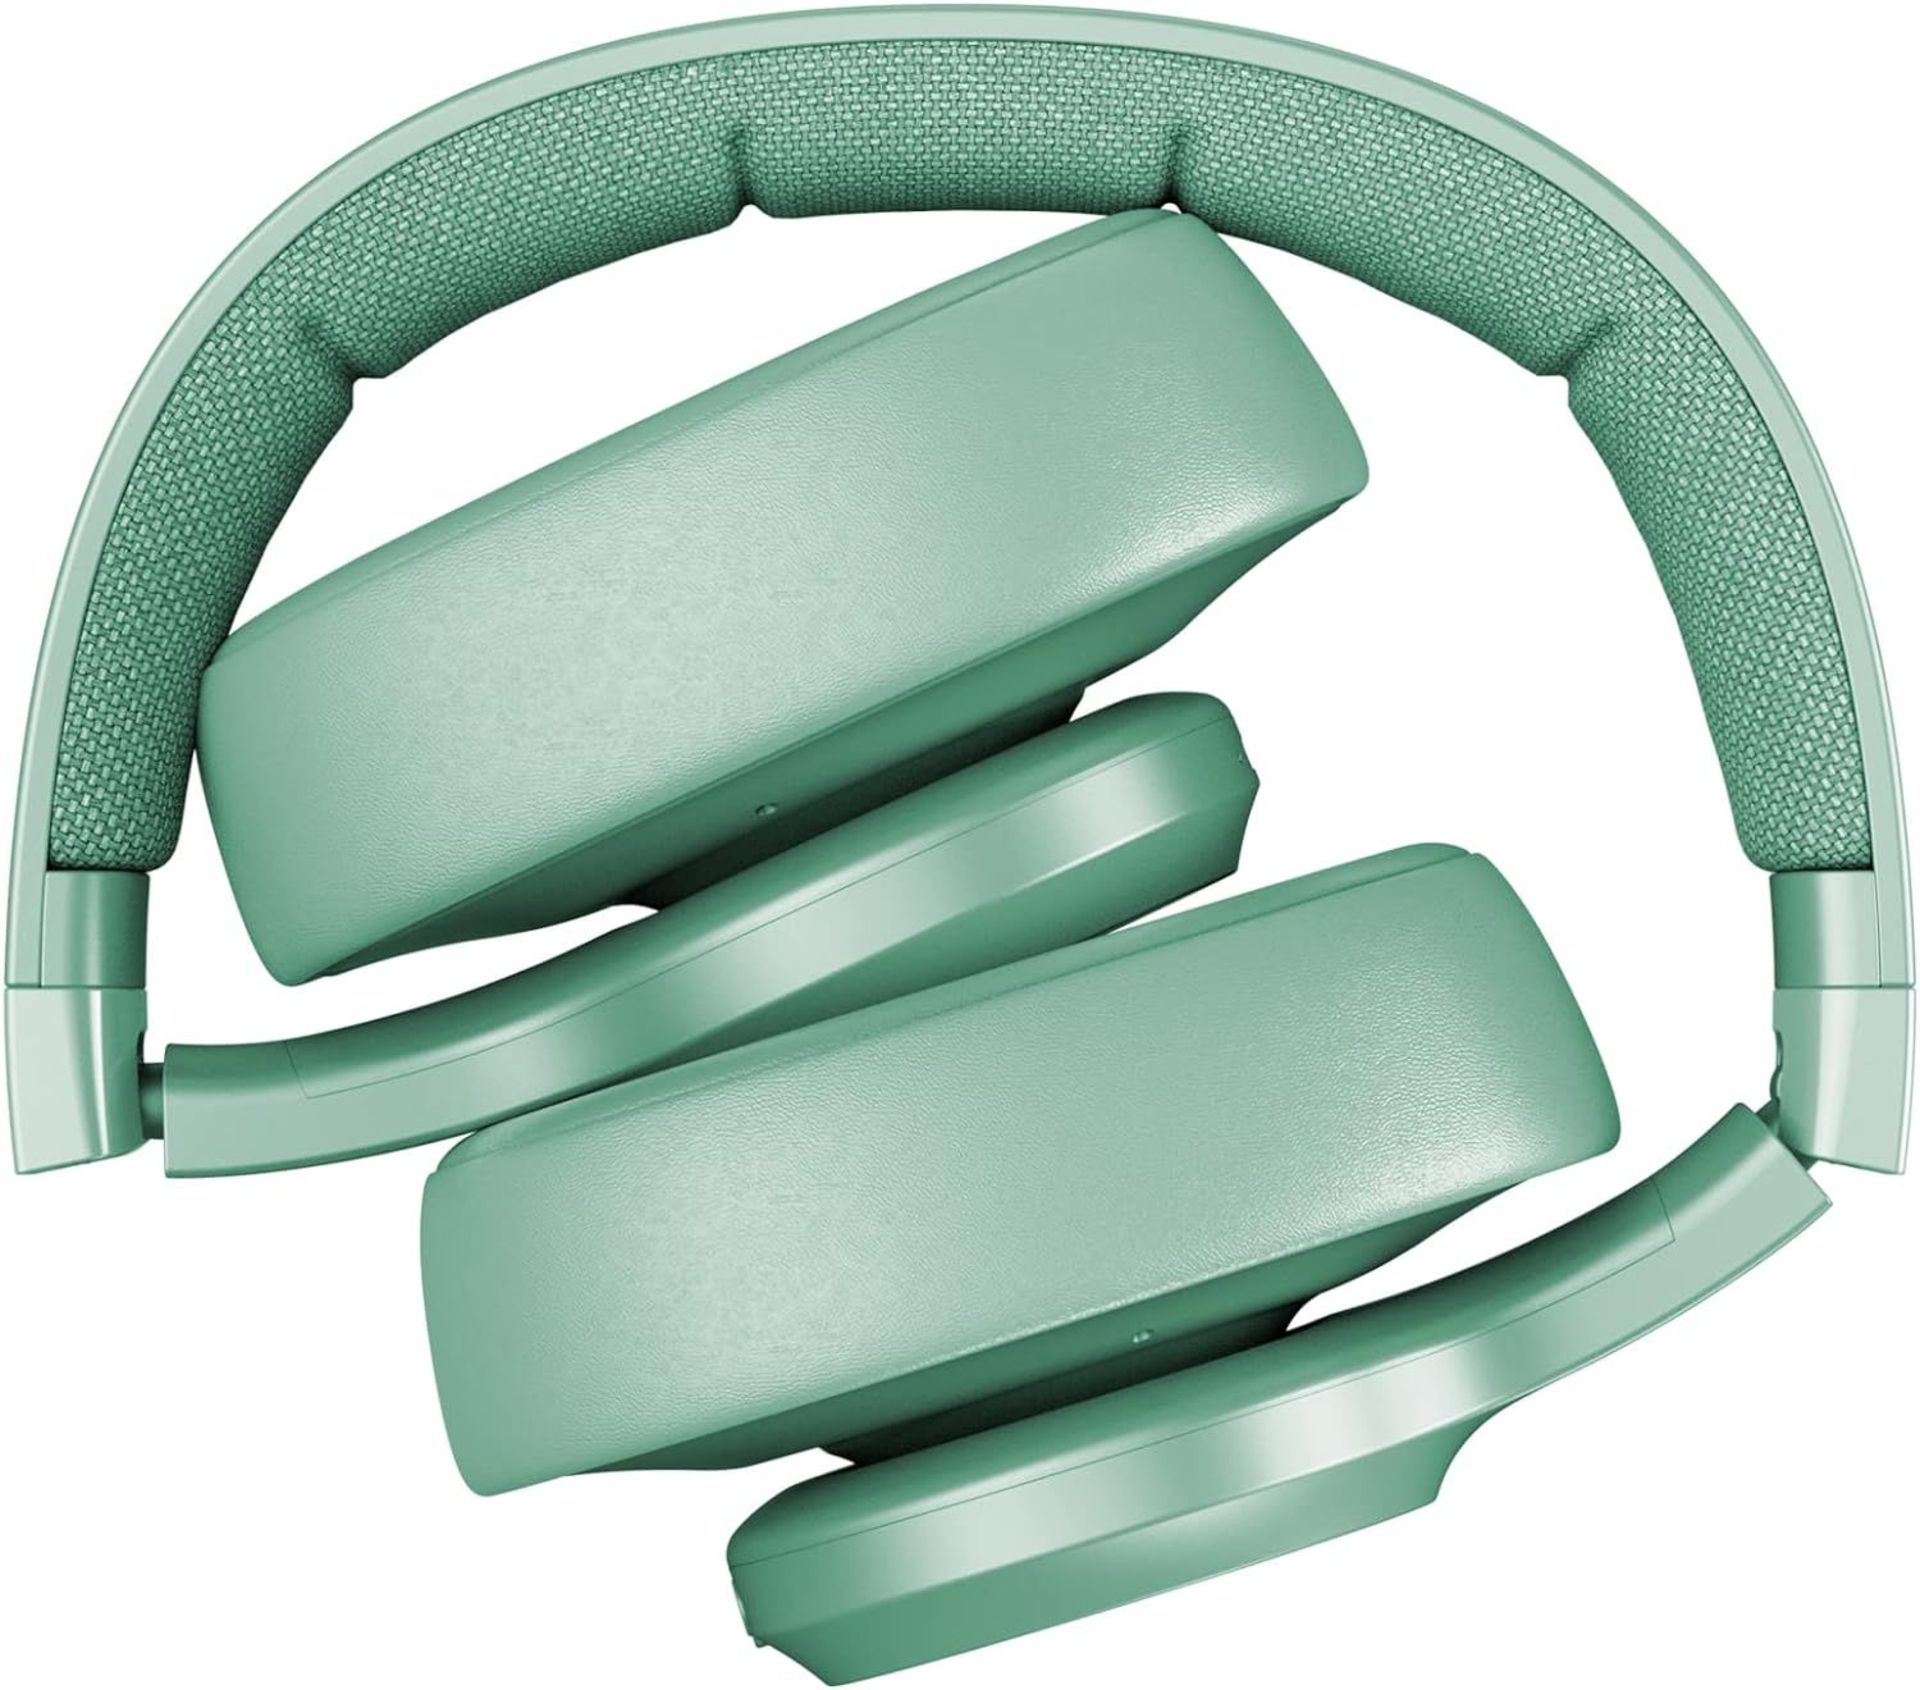 Fresh ’n Rebel Clam ANC Headphones Misty Mint |Over-ear Wireless Bluetooth Headphones with Active - Image 2 of 3